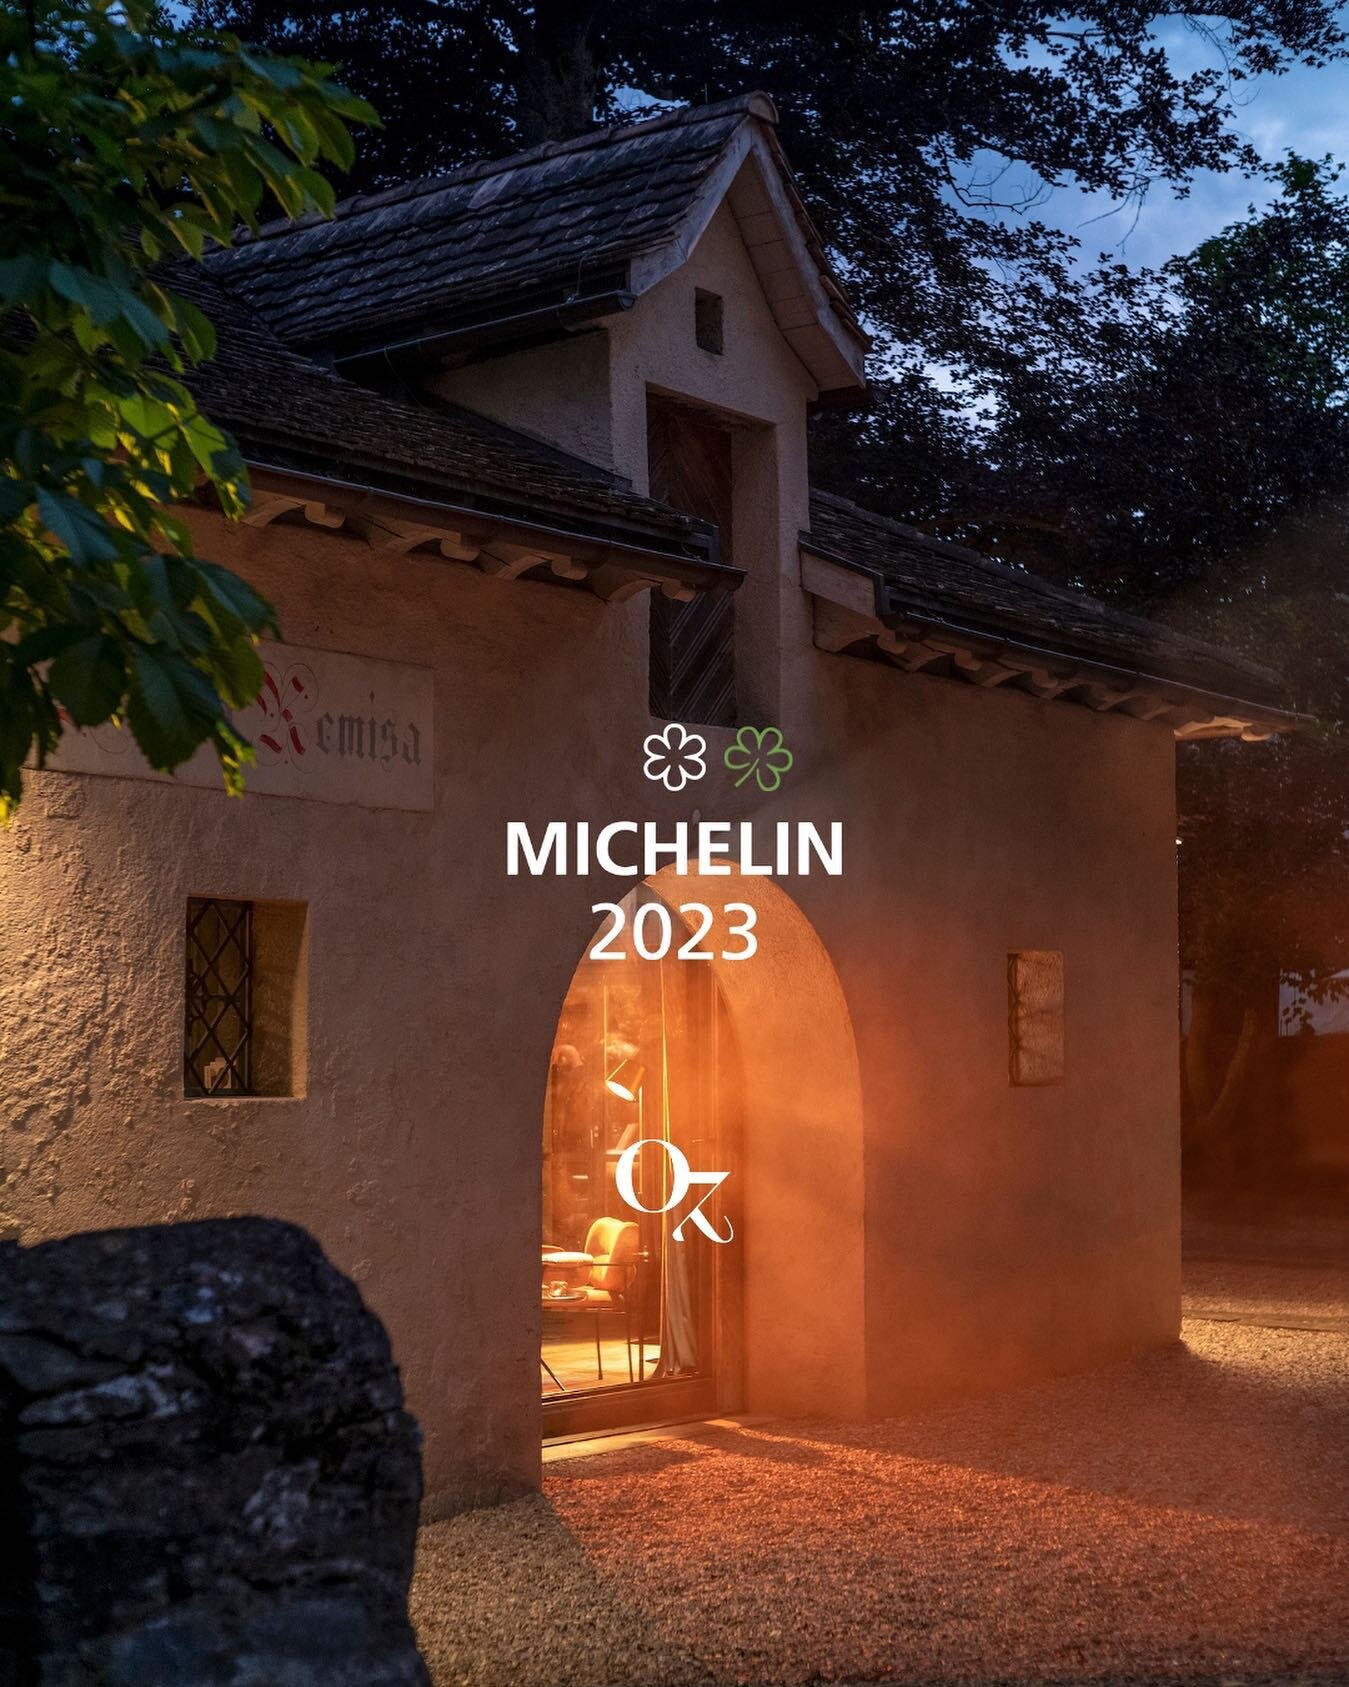 We are thankful to @michelinguide for recognizing our dedication to advancing vegetarian cuisine as we proudly maintain our MICHELIN star &amp; MICHELIN green star. 

#MICHELINguideswiss #MICHELINstar
#oneMICHELINstar #gaultmillau
#OZ #vegetarian #an